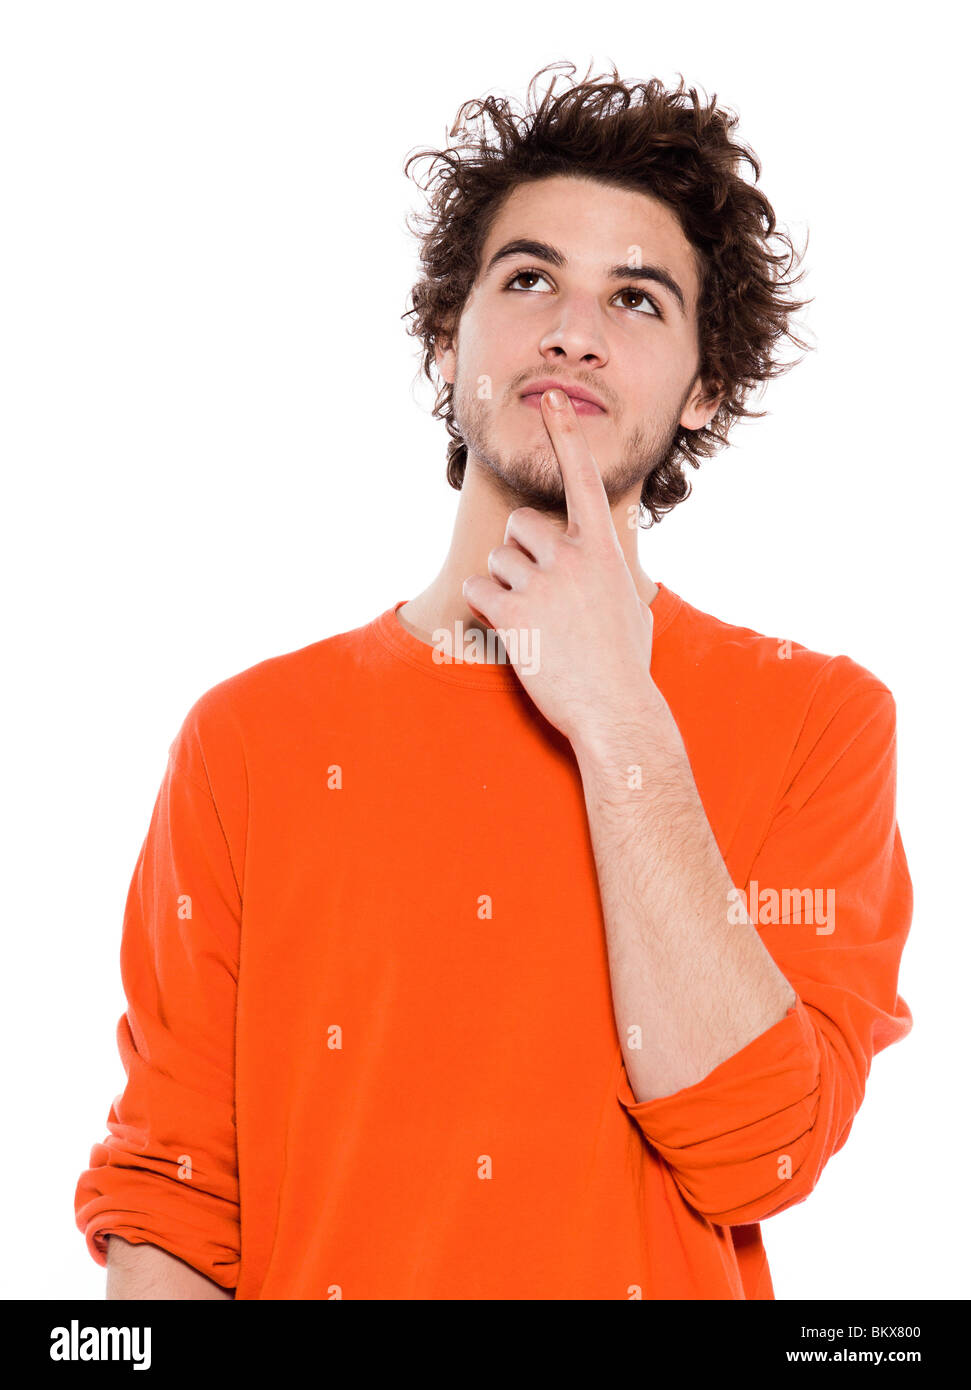 one young thinking looking up  man portrait in studio isolated on white background Stock Photo